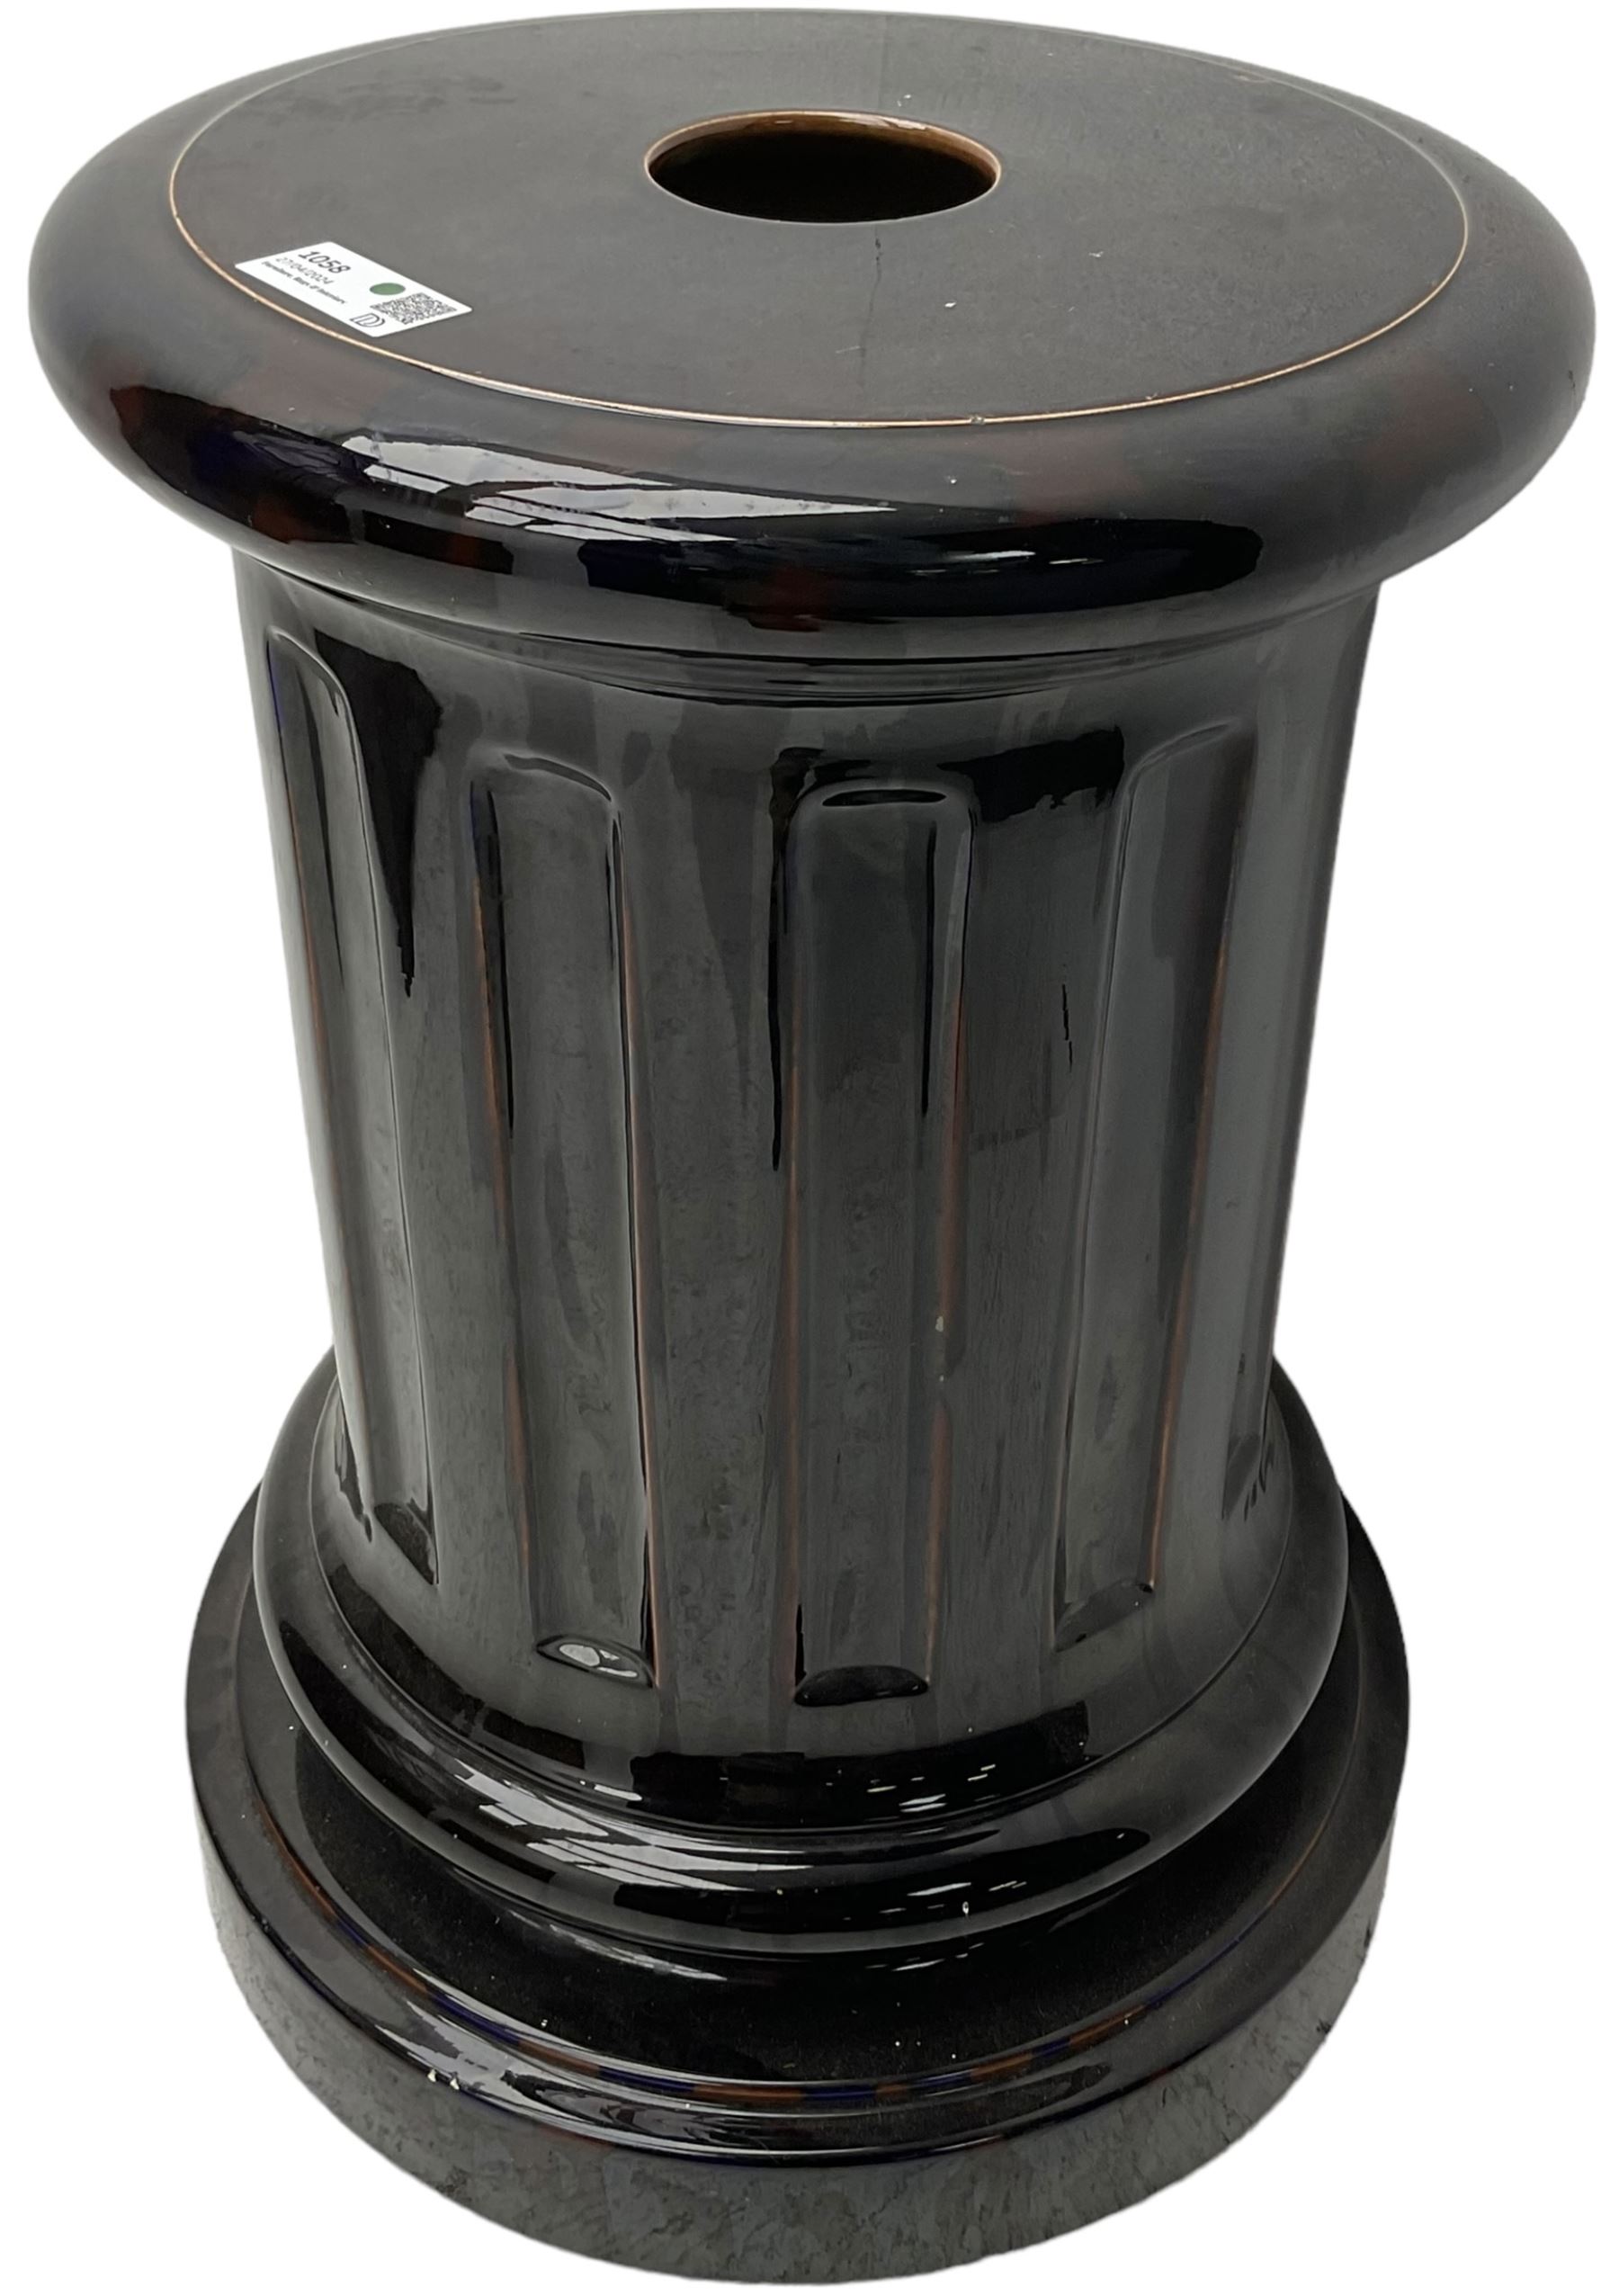 Late 19th to early 20th century Sarreguemines red and blue glazed pedestal stand - Image 4 of 4